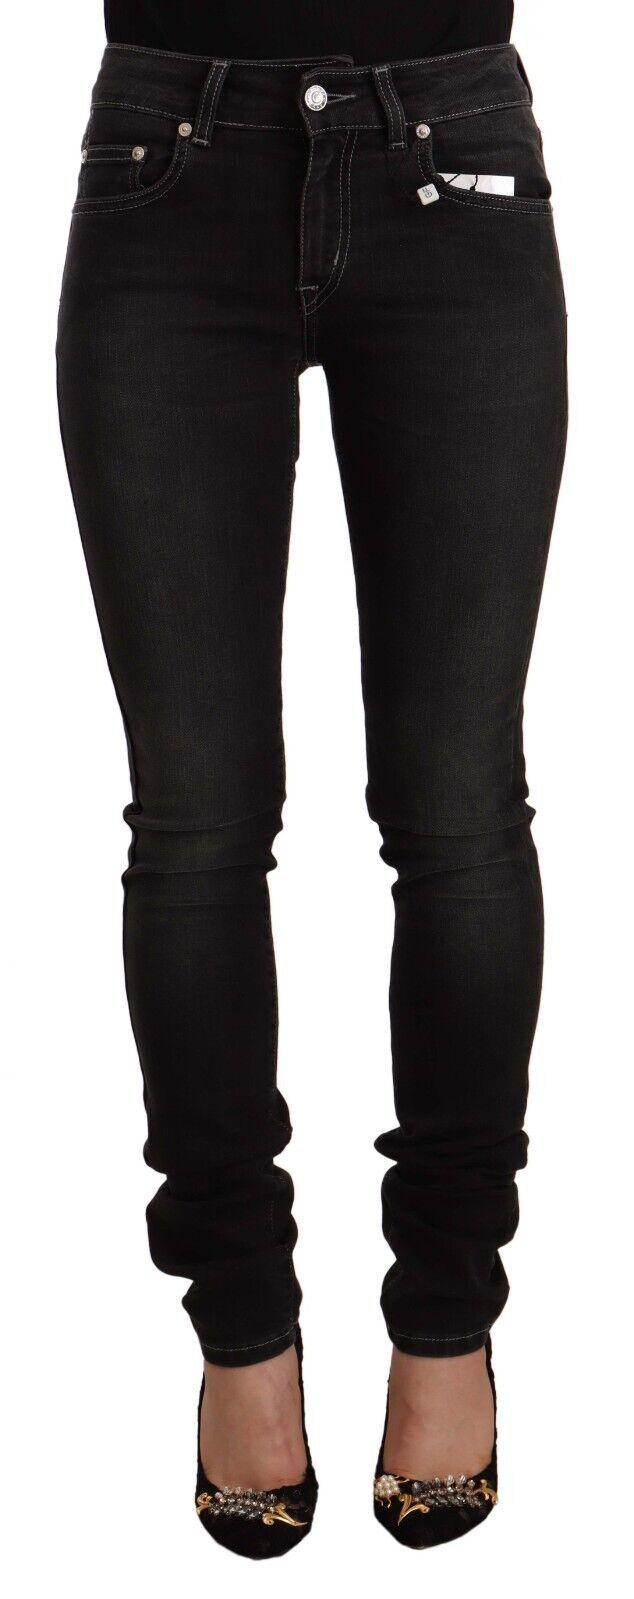 Chic Slim-Fit Black Washed Jeans